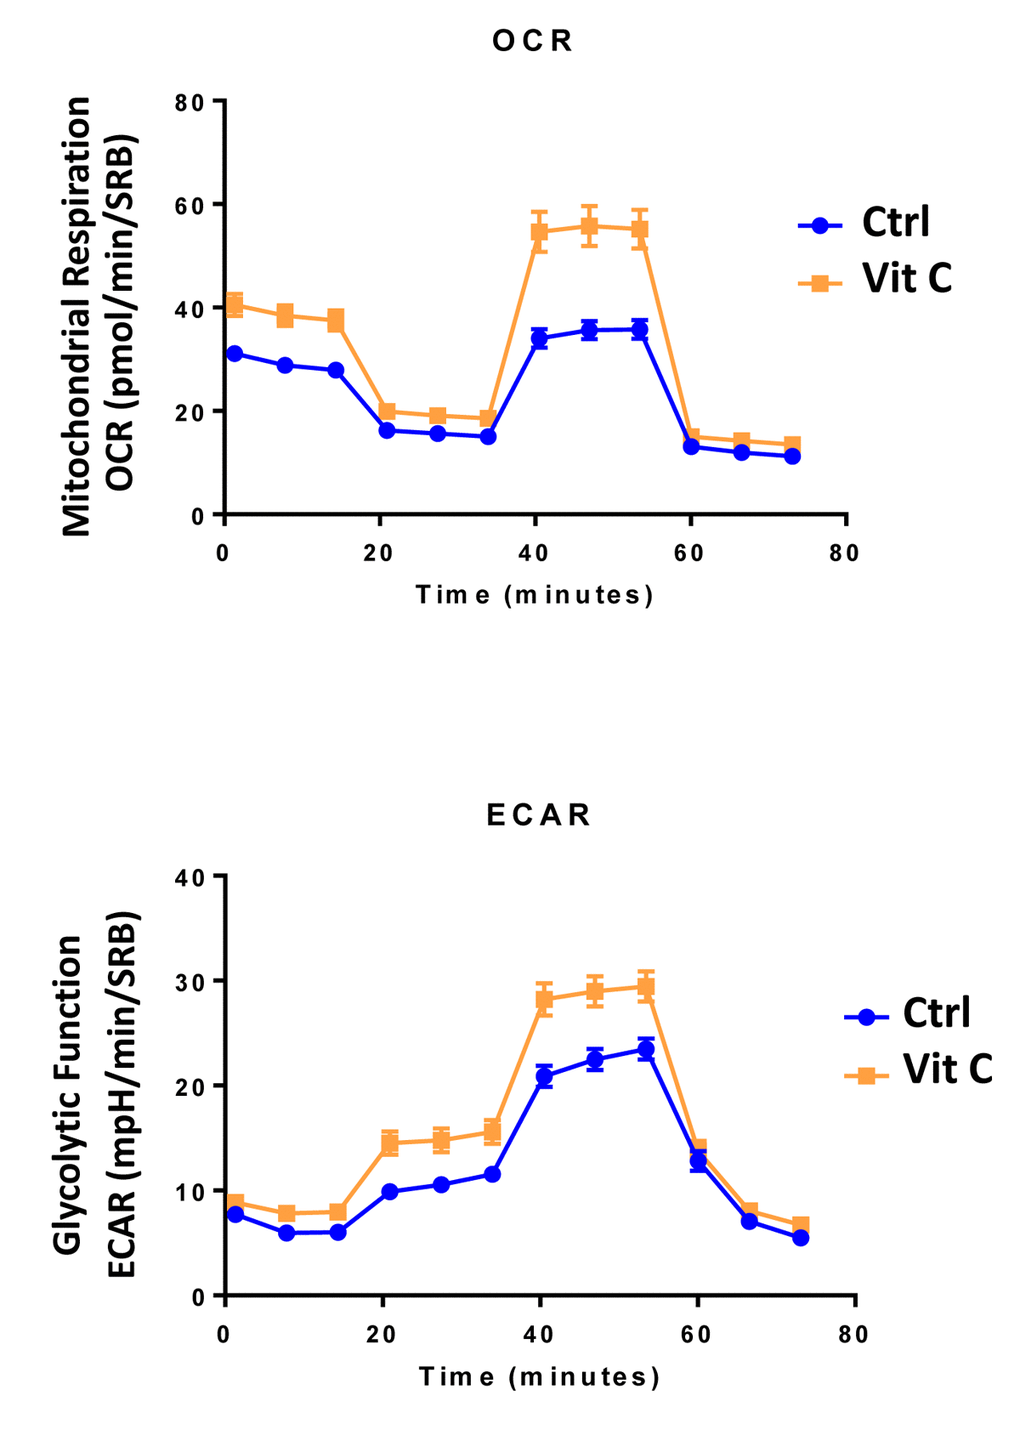 Low-dose Vitamin C alone increases both mitochondrial metabolism and glycolysis: Seahorse profiles. The metabolic profile of MCF7 cell monolayers pre-treated with 250 μM Vitamin C alone for 3 days was assessed using the Seahorse XFe96 analyzer. Note that treatment with 250 μM Vitamin C significantly increased both mitochondrial metabolism and glycolysis in MCF7 cancer cells. These observations are consistent with the idea that Vitamin C acts as a mild pro-oxidant and stimulates mitochondrial biogenesis, driving increased mitochondrial metabolism.